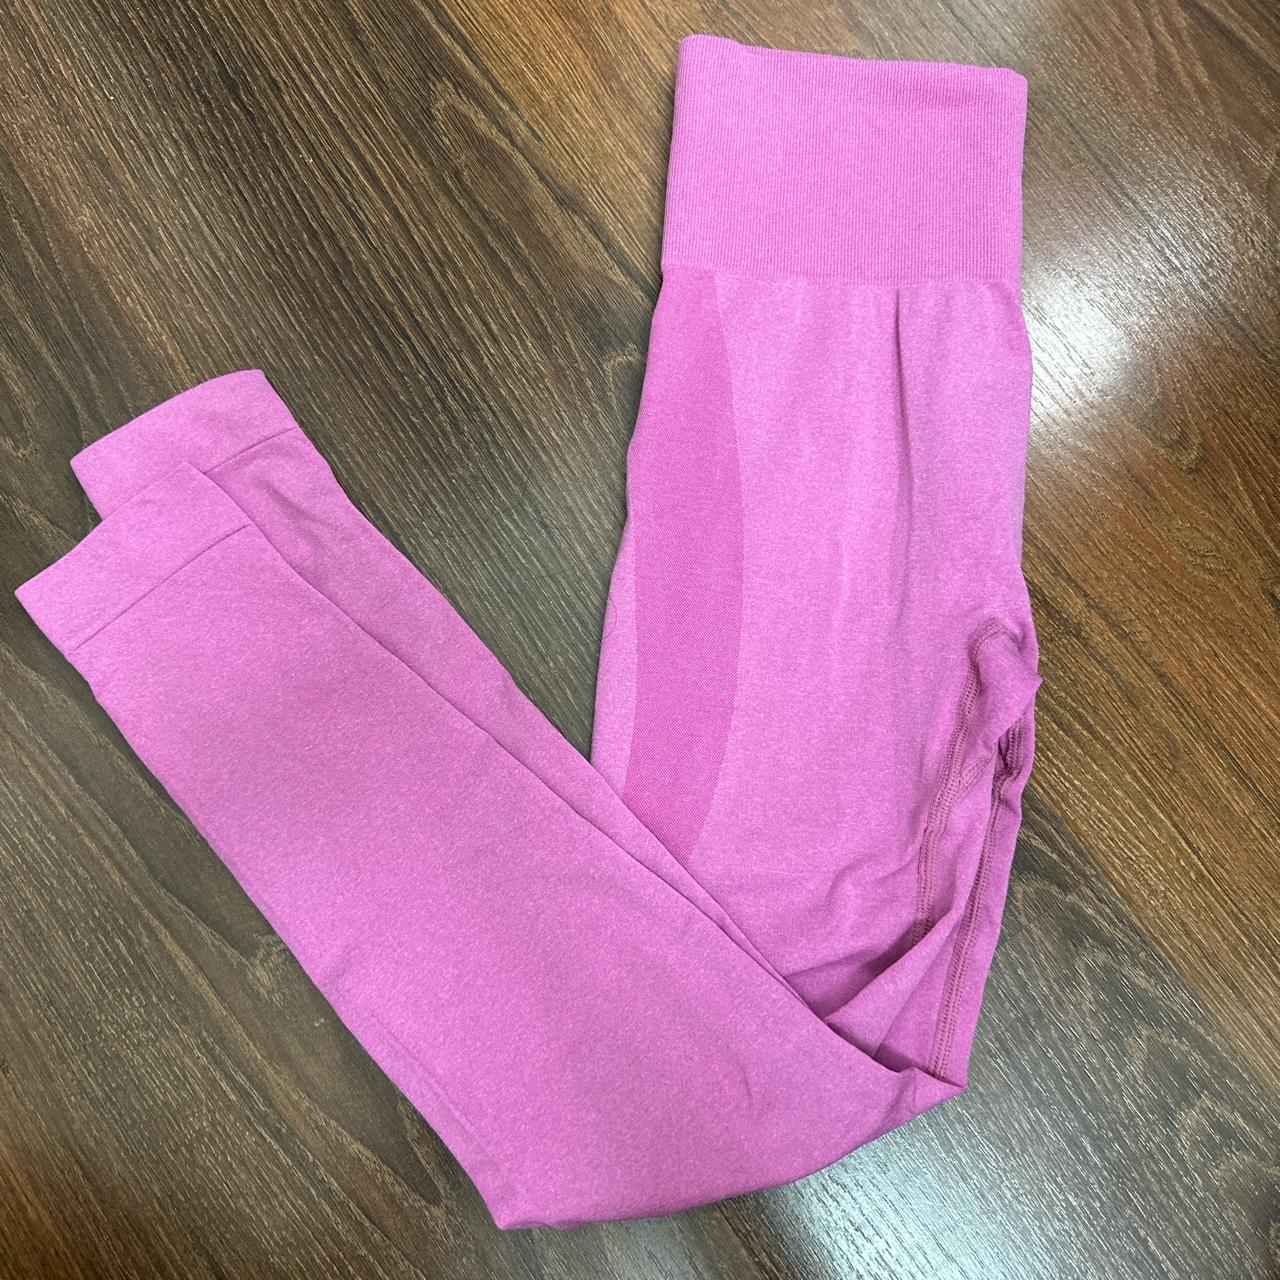 amazon nvgtn leggings dupes size small worn once - Depop